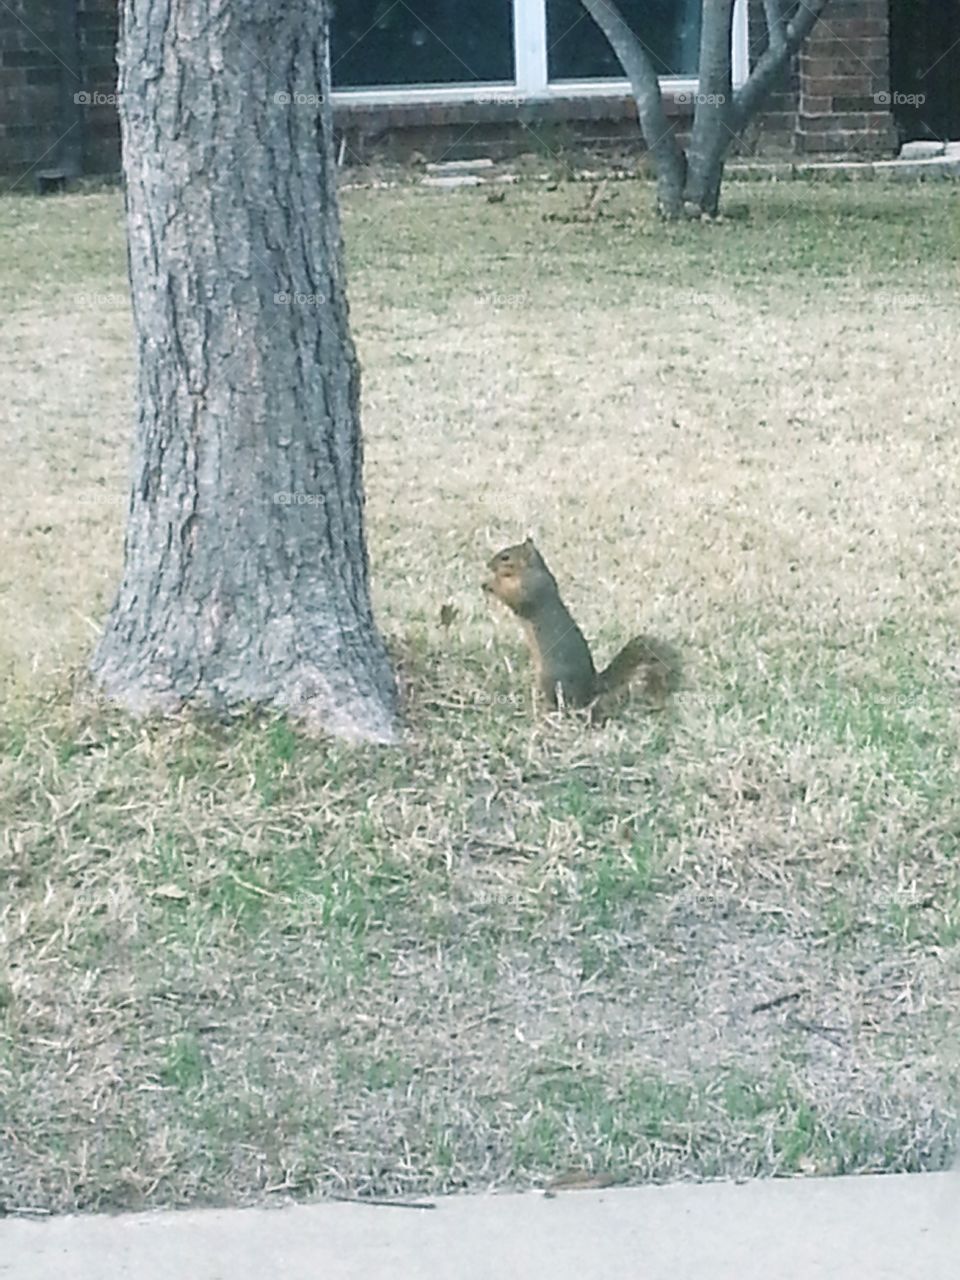 This little guy was just chilling out in my front yard. He was too cute not to snap this picture of him chomping down on the pecans.